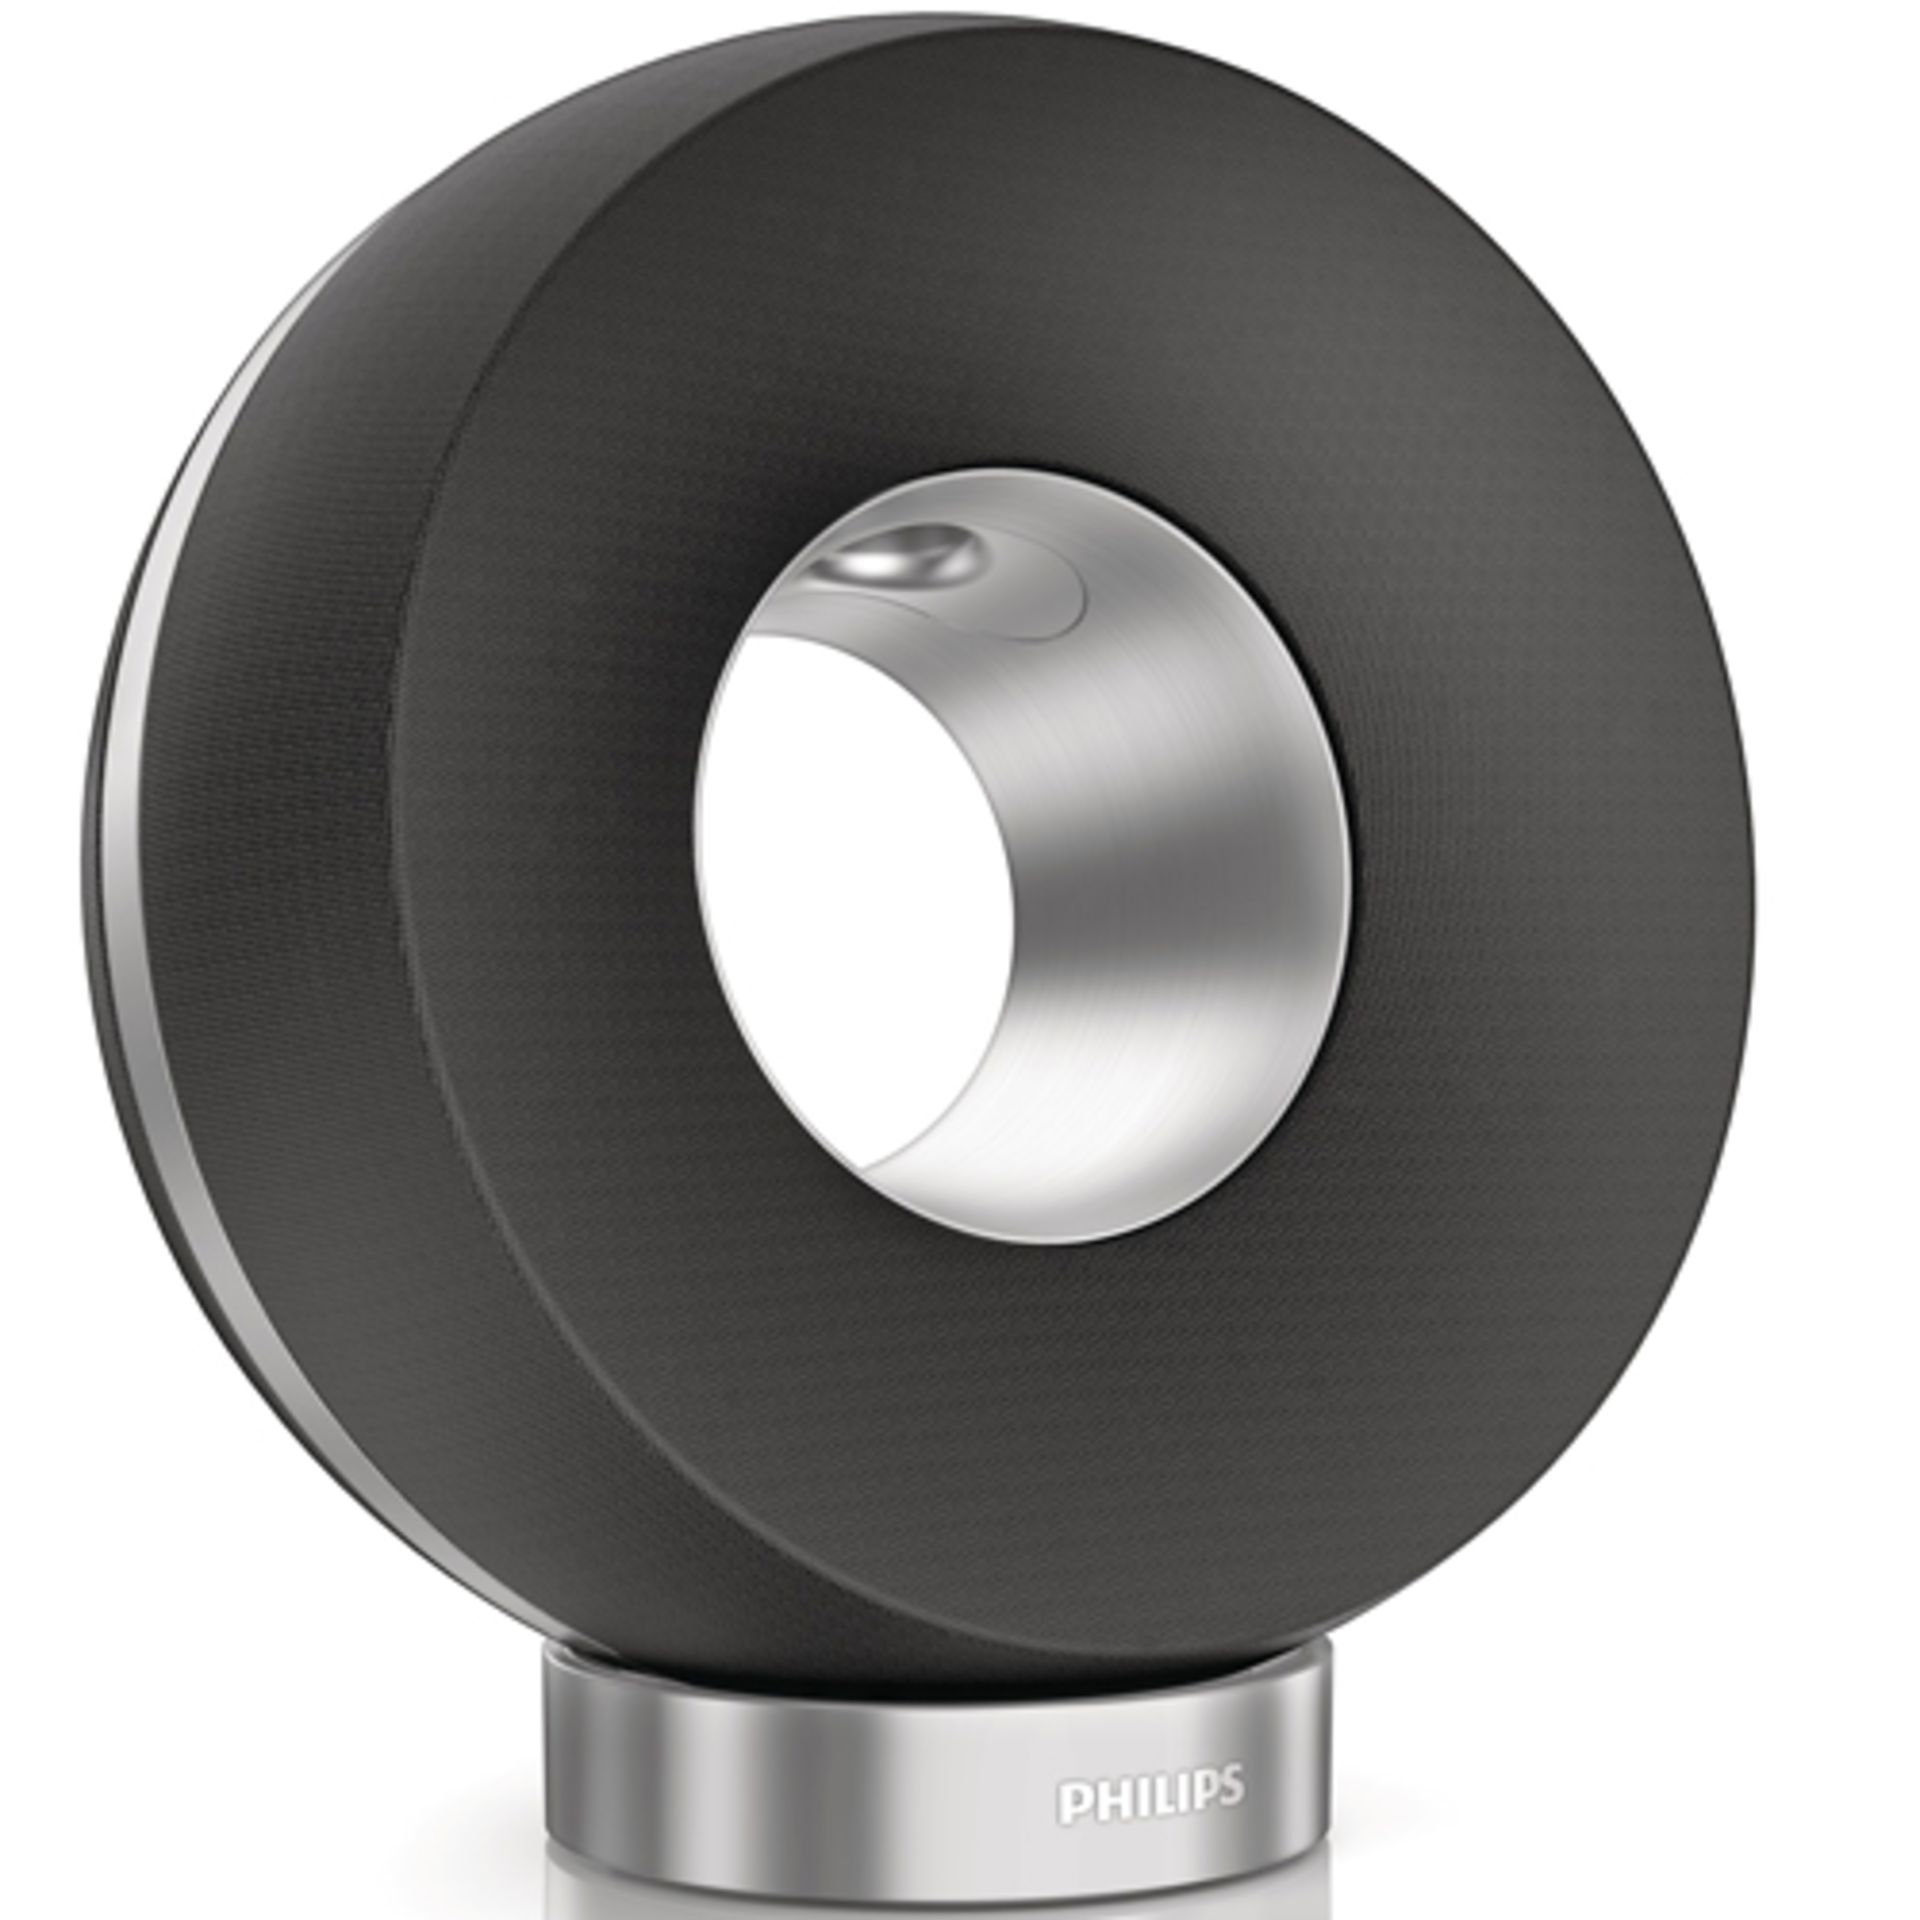 V *TRADE QTY* Brand New Phillips DS3880/10 Fidelio Soundsphere with Airplay - Aux Input - USB For